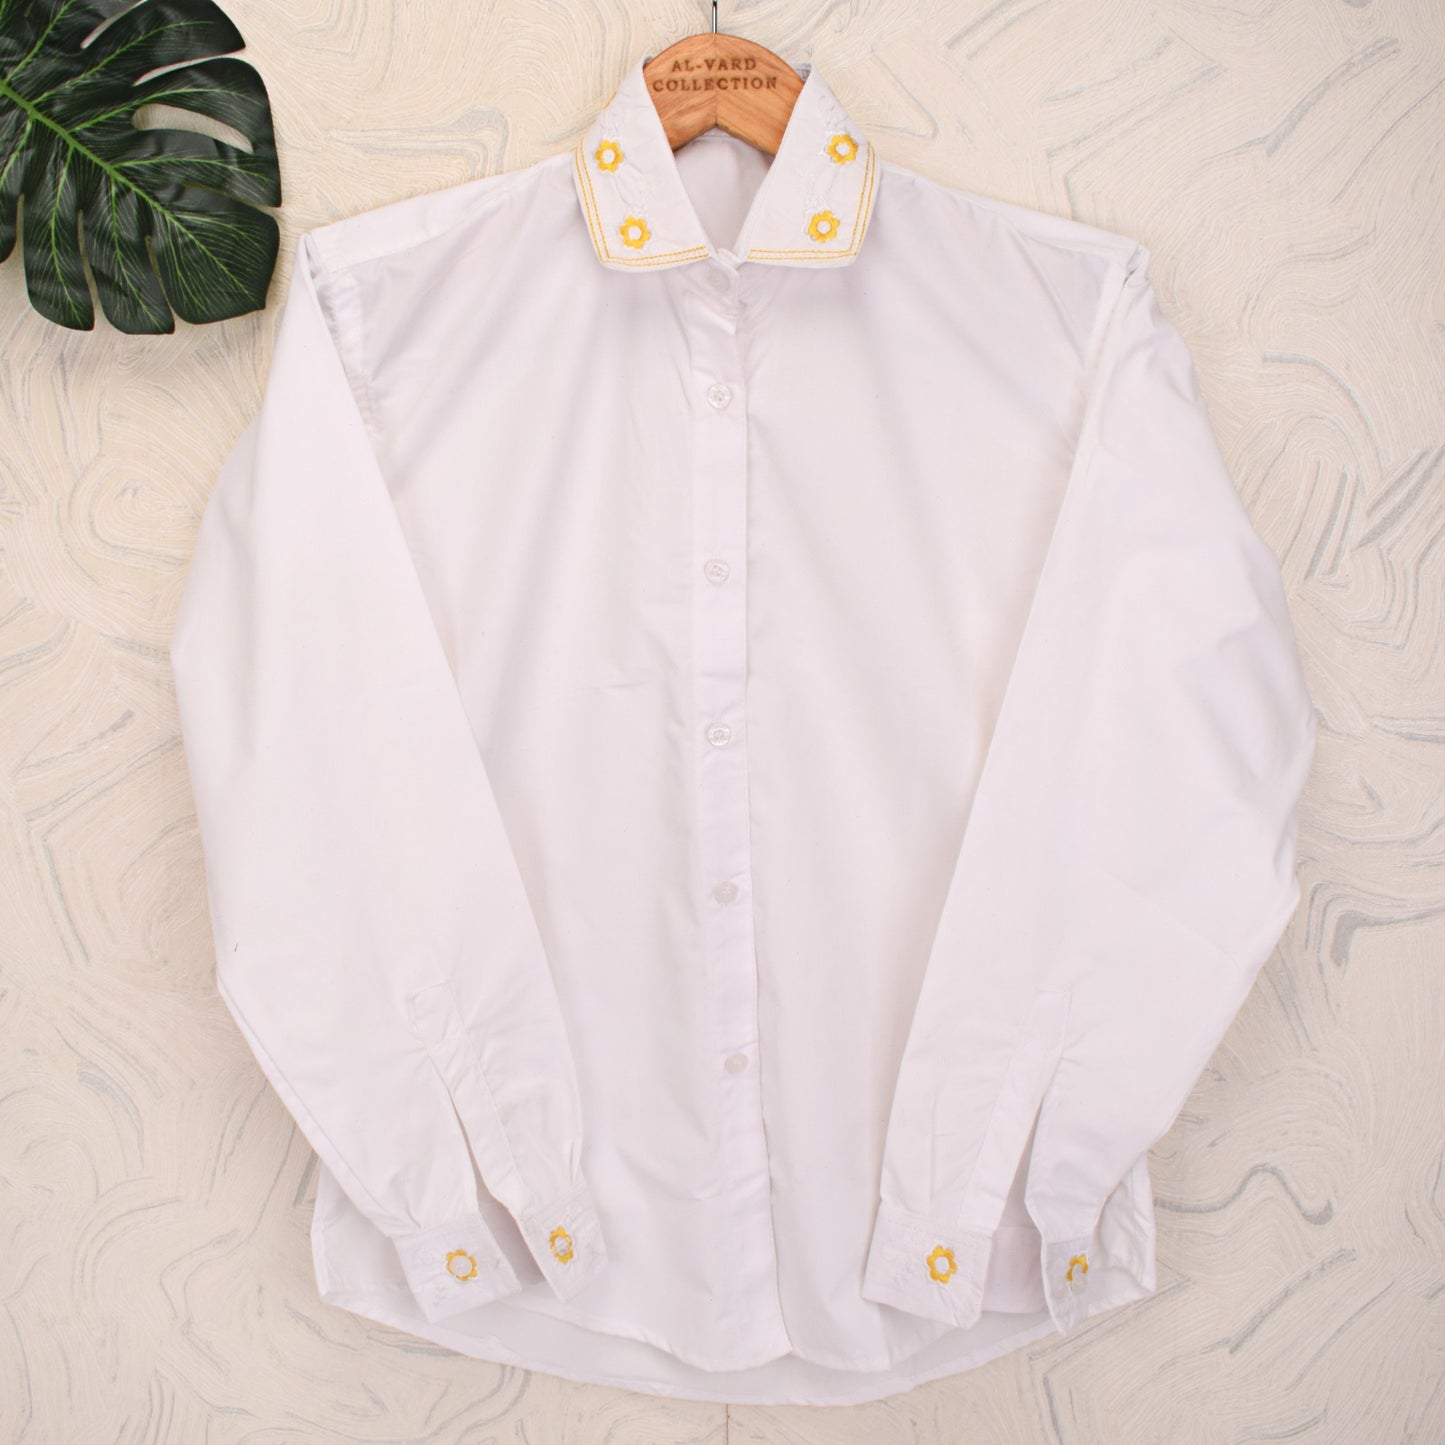 Al Vard Shirt With Embroidery